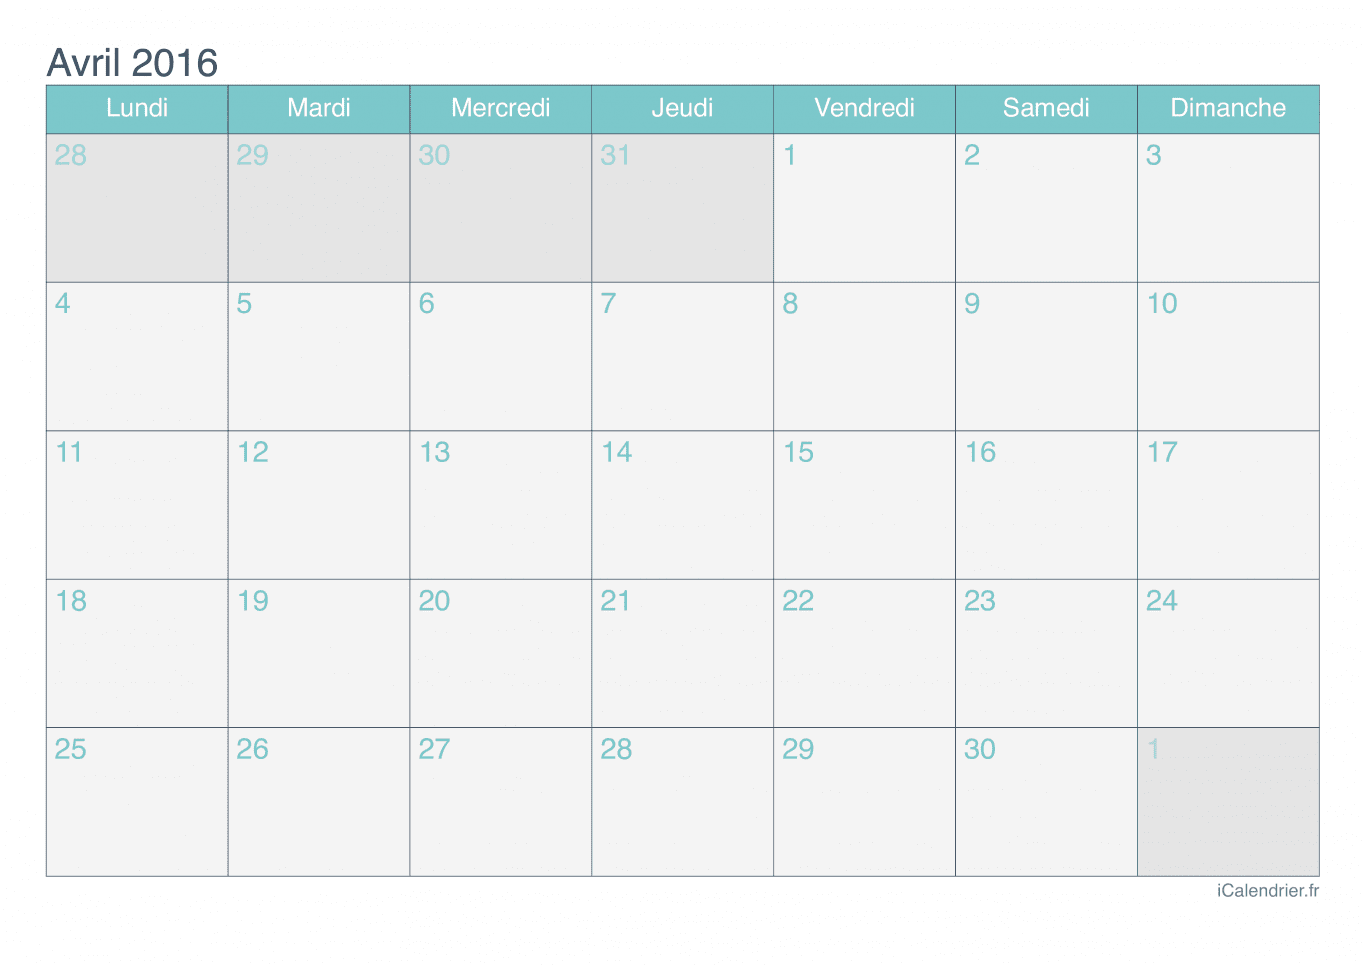 Calendrier d'avril 2016 - Turquoise